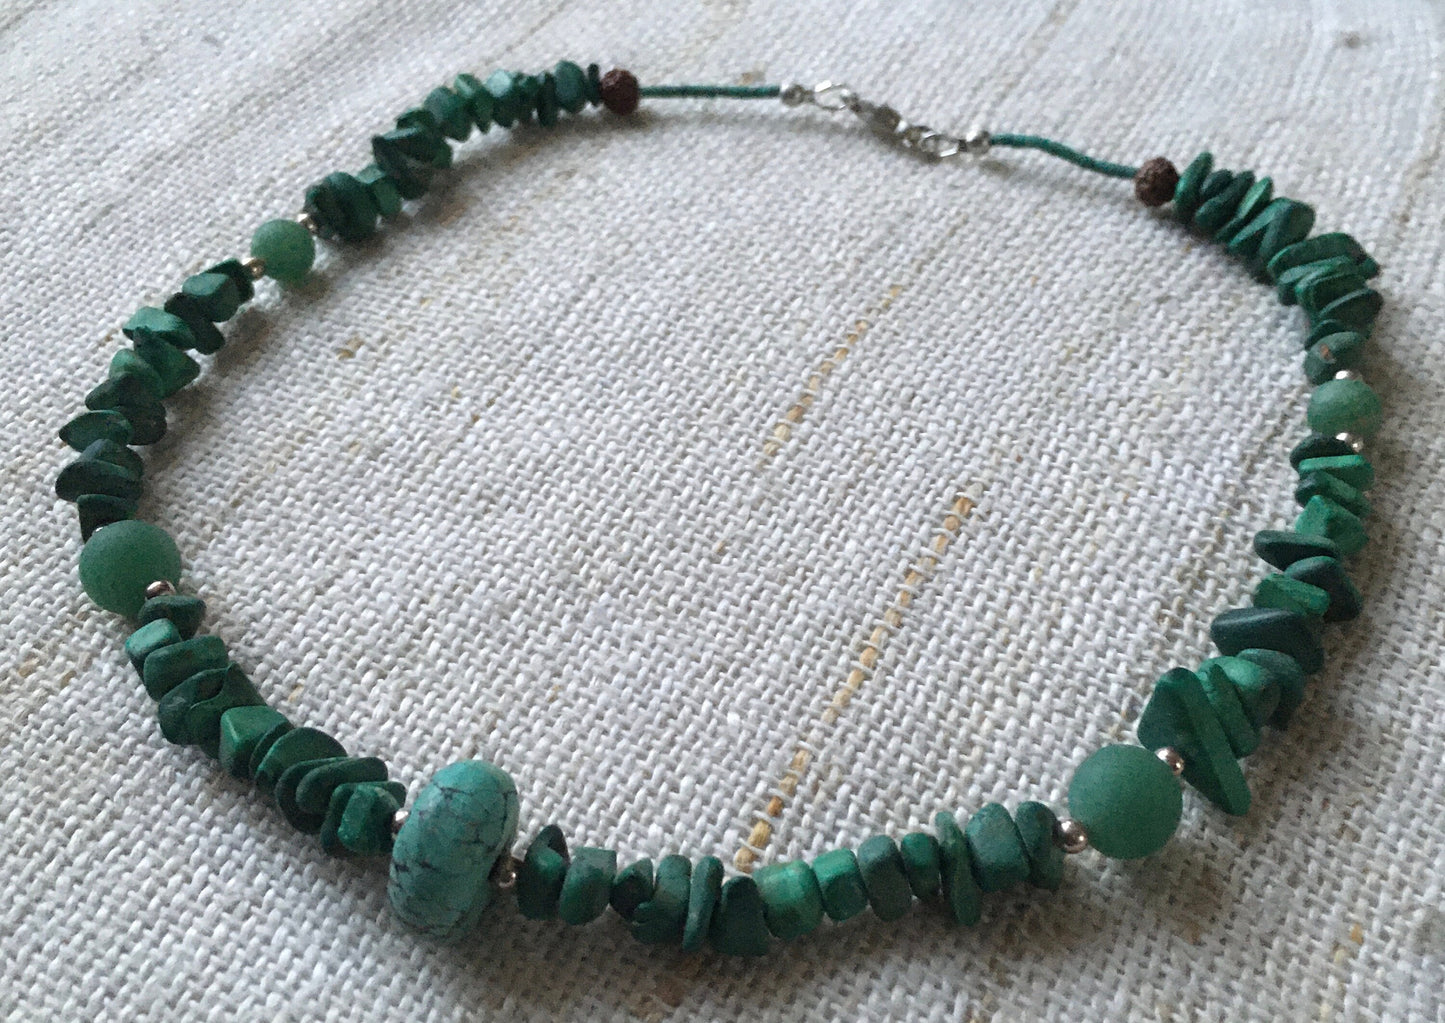 Turquoise, Malachite and Aventurine Necklace & Eco-Silver clasp.